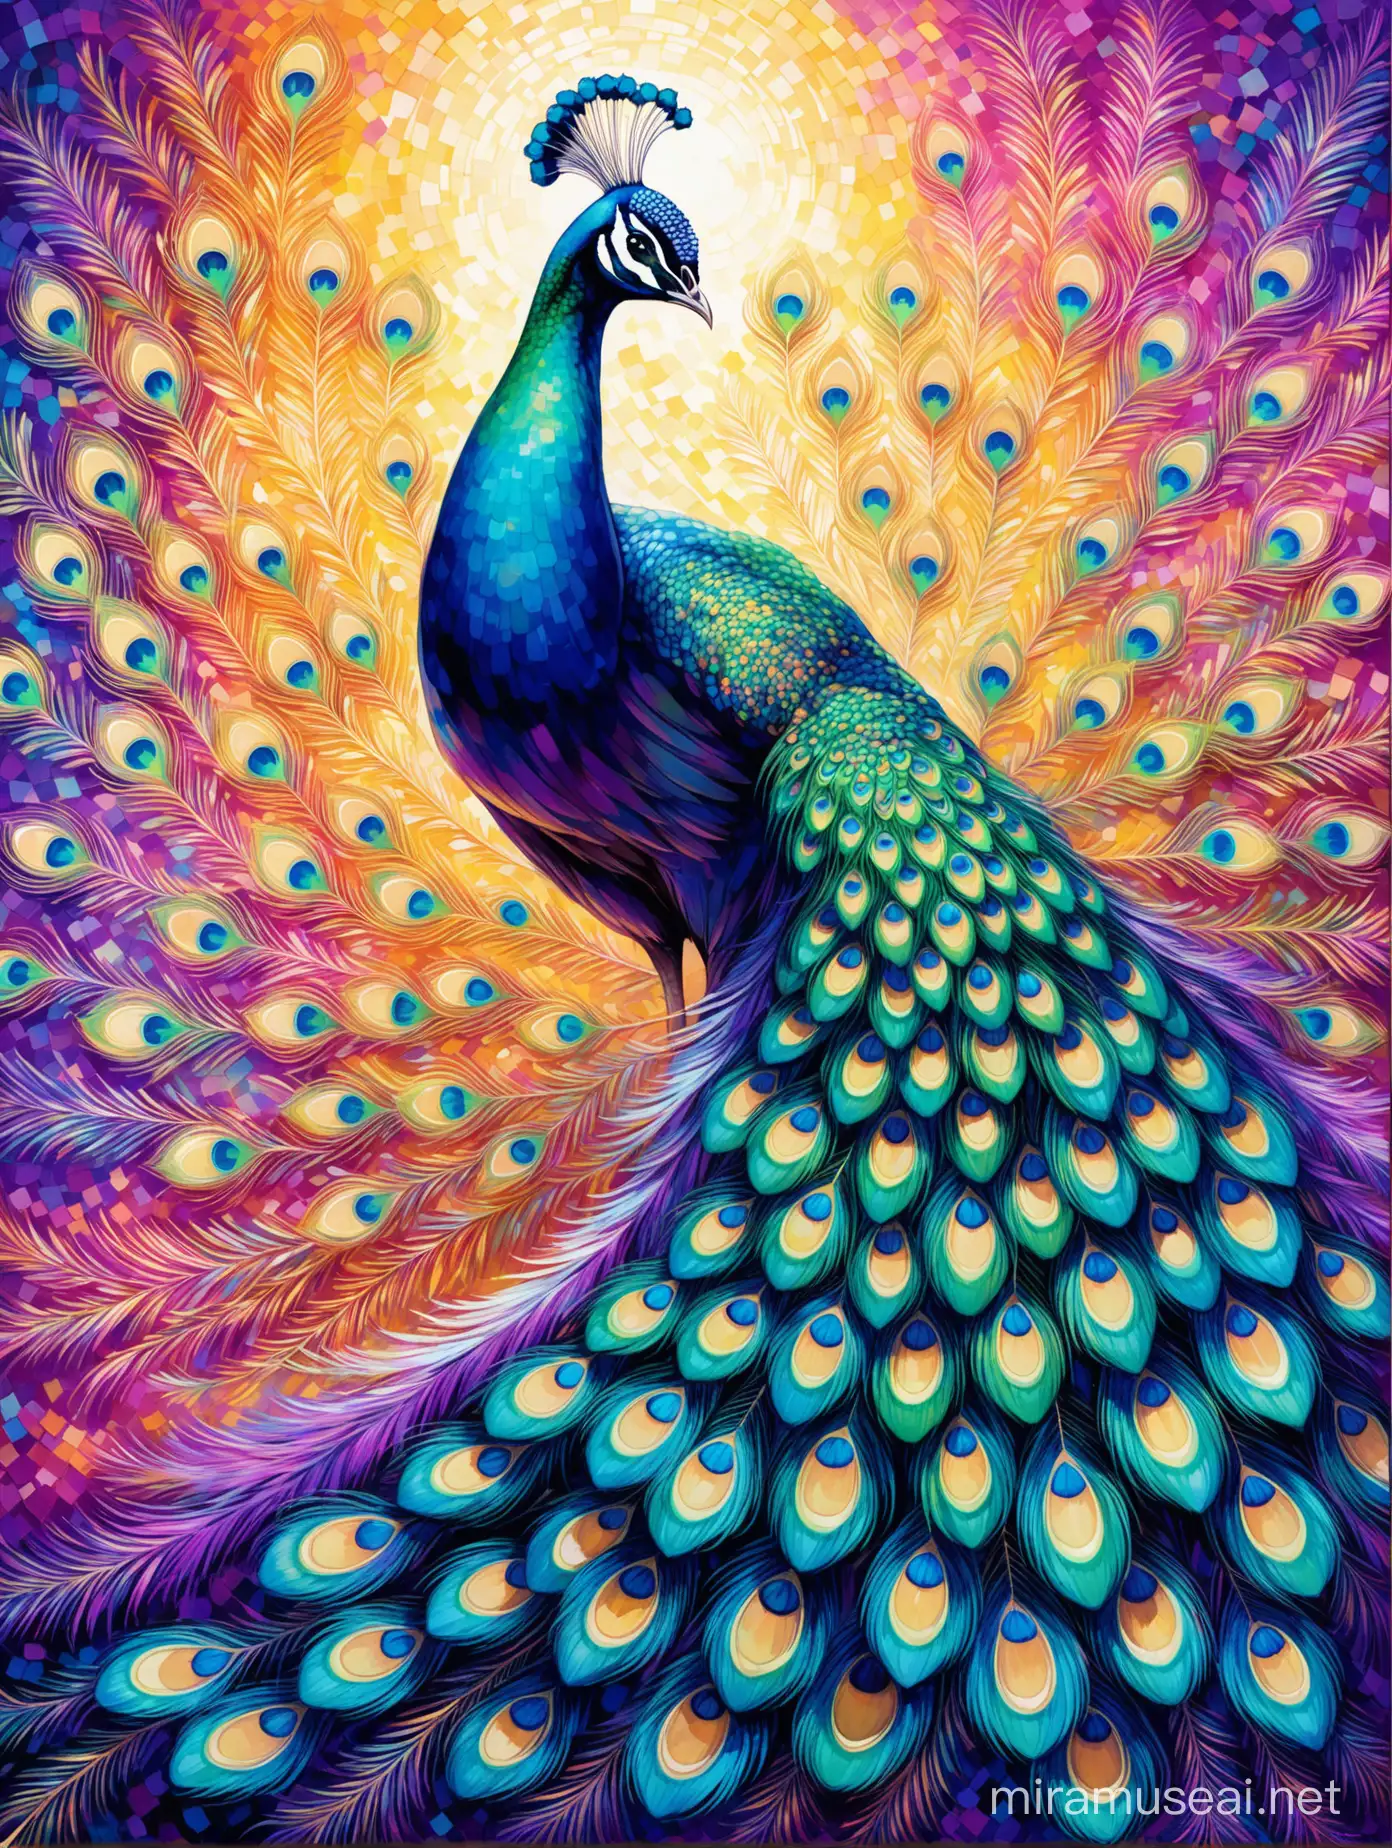 Imagine an abstract painting bursting with vibrant colors, inspired by the majestic beauty of a peacock. Swirls of blues, greens, purples, and golds come together to create a mesmerizing display of abstract artistry. Though abstract in form, the painting captures the essence of the peacock's iridescent plumage and graceful demeanor. Each brushstroke adds to the intricate patterns and textures, evoking the intricate beauty of the bird's feathers. This abstract masterpiece invites viewers to immerse themselves in the vibrant energy and elegance of the peacock, celebrating its symbolic significance as a symbol of beauty, grace, and renewal.